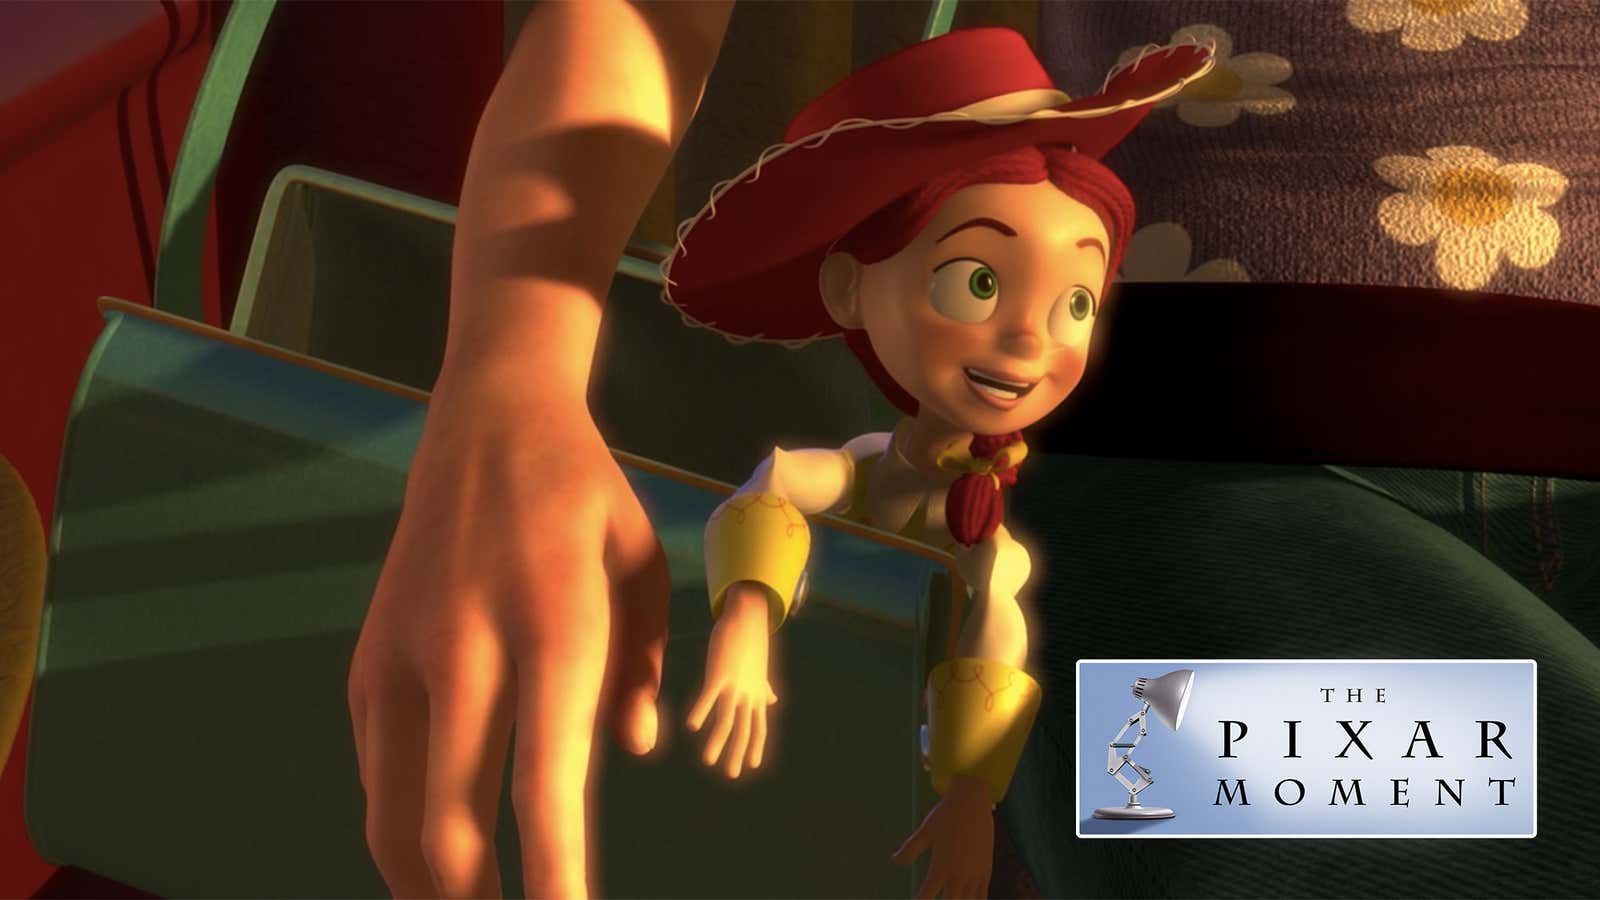 Is it just me or did this scene remind anyone else of Toy Story 2 lol :  r/Pixar